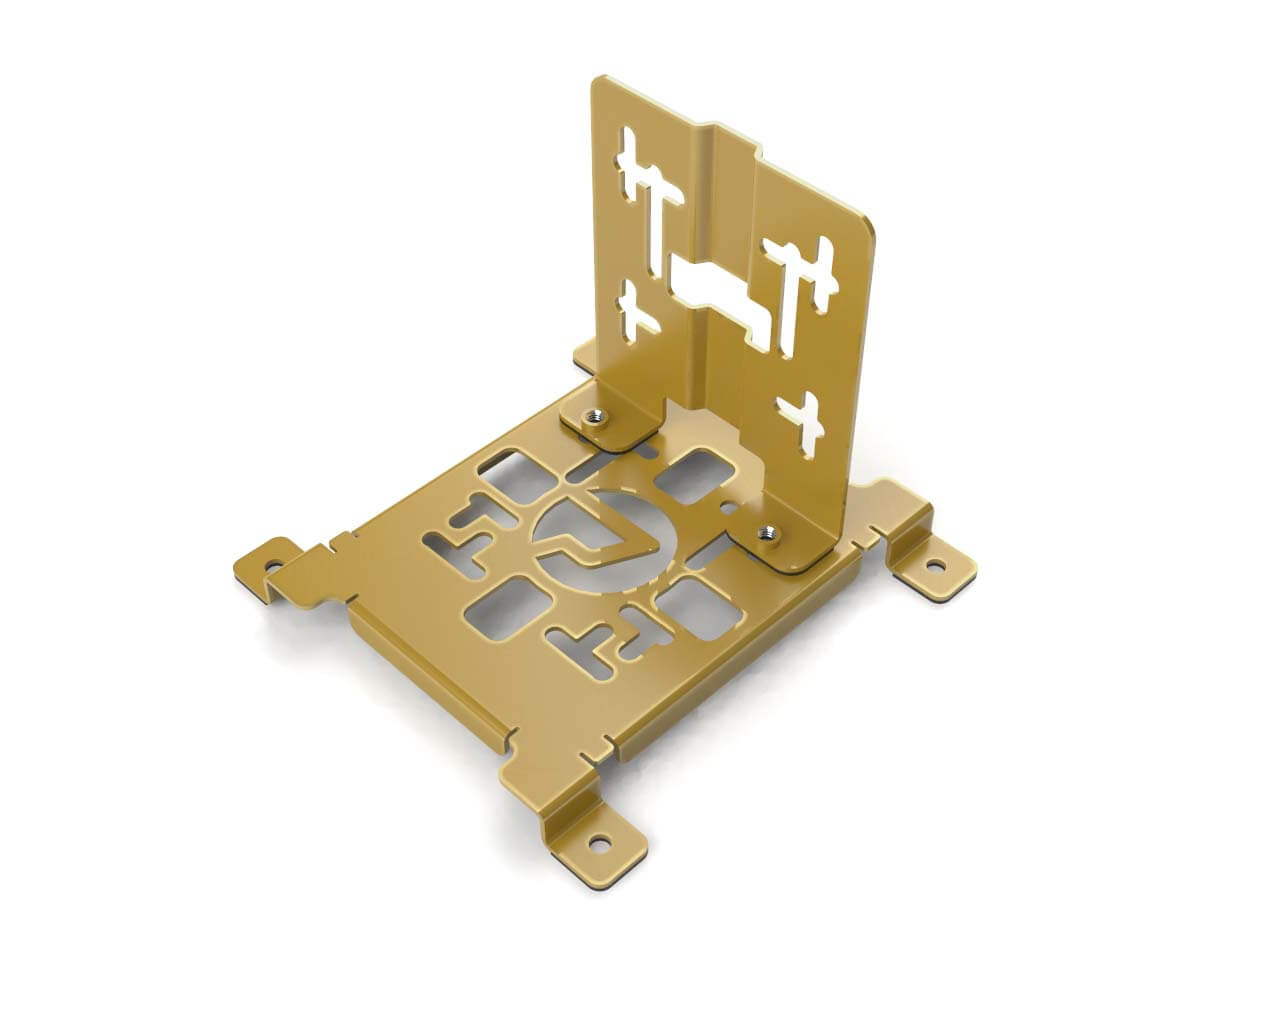 PrimoChill SX Universal Spider Mount Bracket Kit - 120mm Series - PrimoChill - KEEPING IT COOL Candy Gold